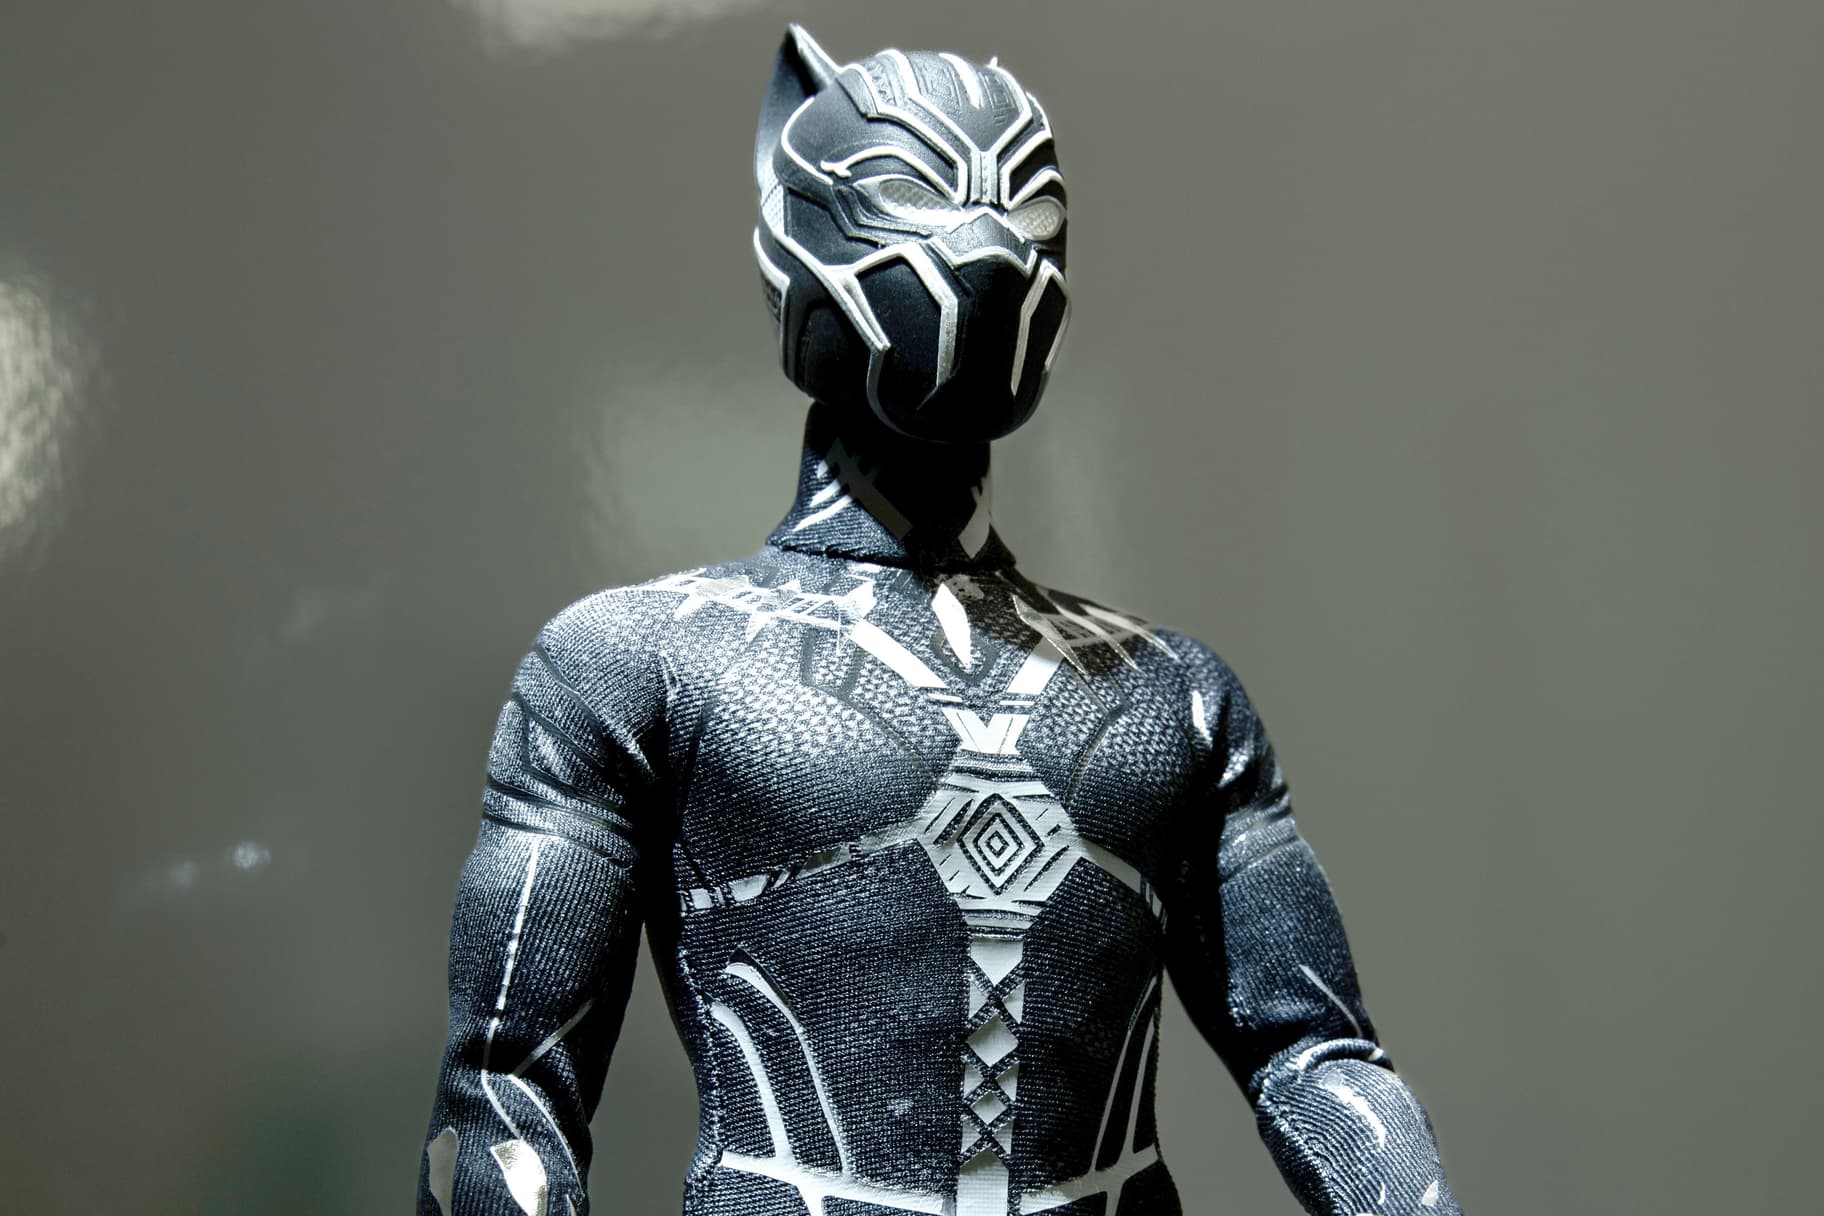 One-Of-A-Kind Doll - inspired by Marvel Studios’ Black Panther